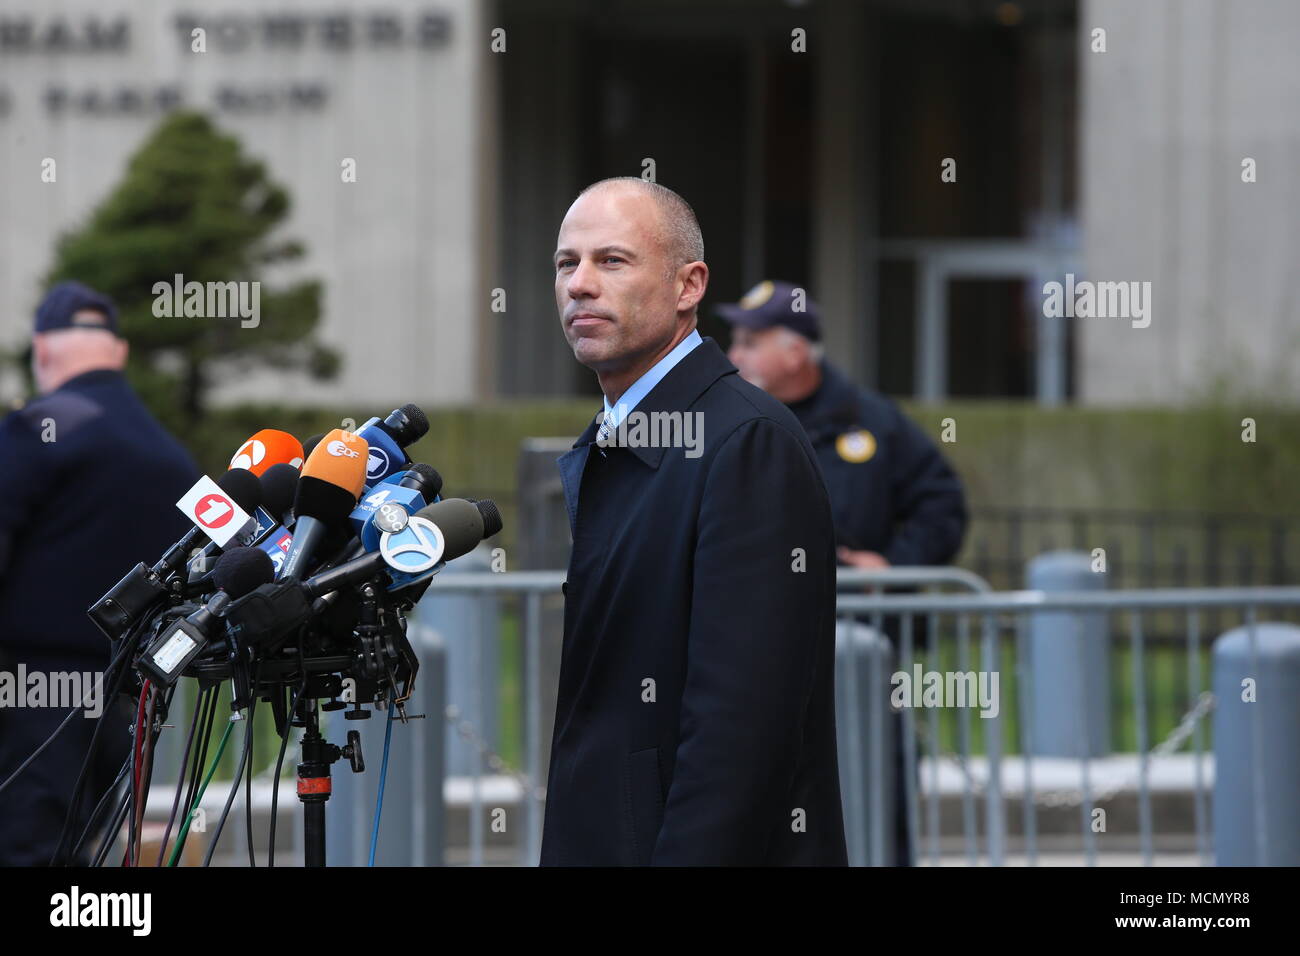 Clifford's Attorney, Michael Avenatti, Addresses Media. New York City. 16th Apr, 2018. 2018: Donald Trump's personal attorney, Michael Cohen & adult film star, Stormy Daniels appeared in federal court in Lower Manhattan US District Court Judge Kimba Wood ordered Trump attorney Michael Cohen and adult film star Stormy Daniels, ie. Stephanie Clifford, to appear in district court at 2:00 pm, Monday, April 16 to hear arguments about whether or not they should be allowed to view seized documents before prosecutors. Credit: Andy Katz/Pacific Press/Alamy Live News Stock Photo